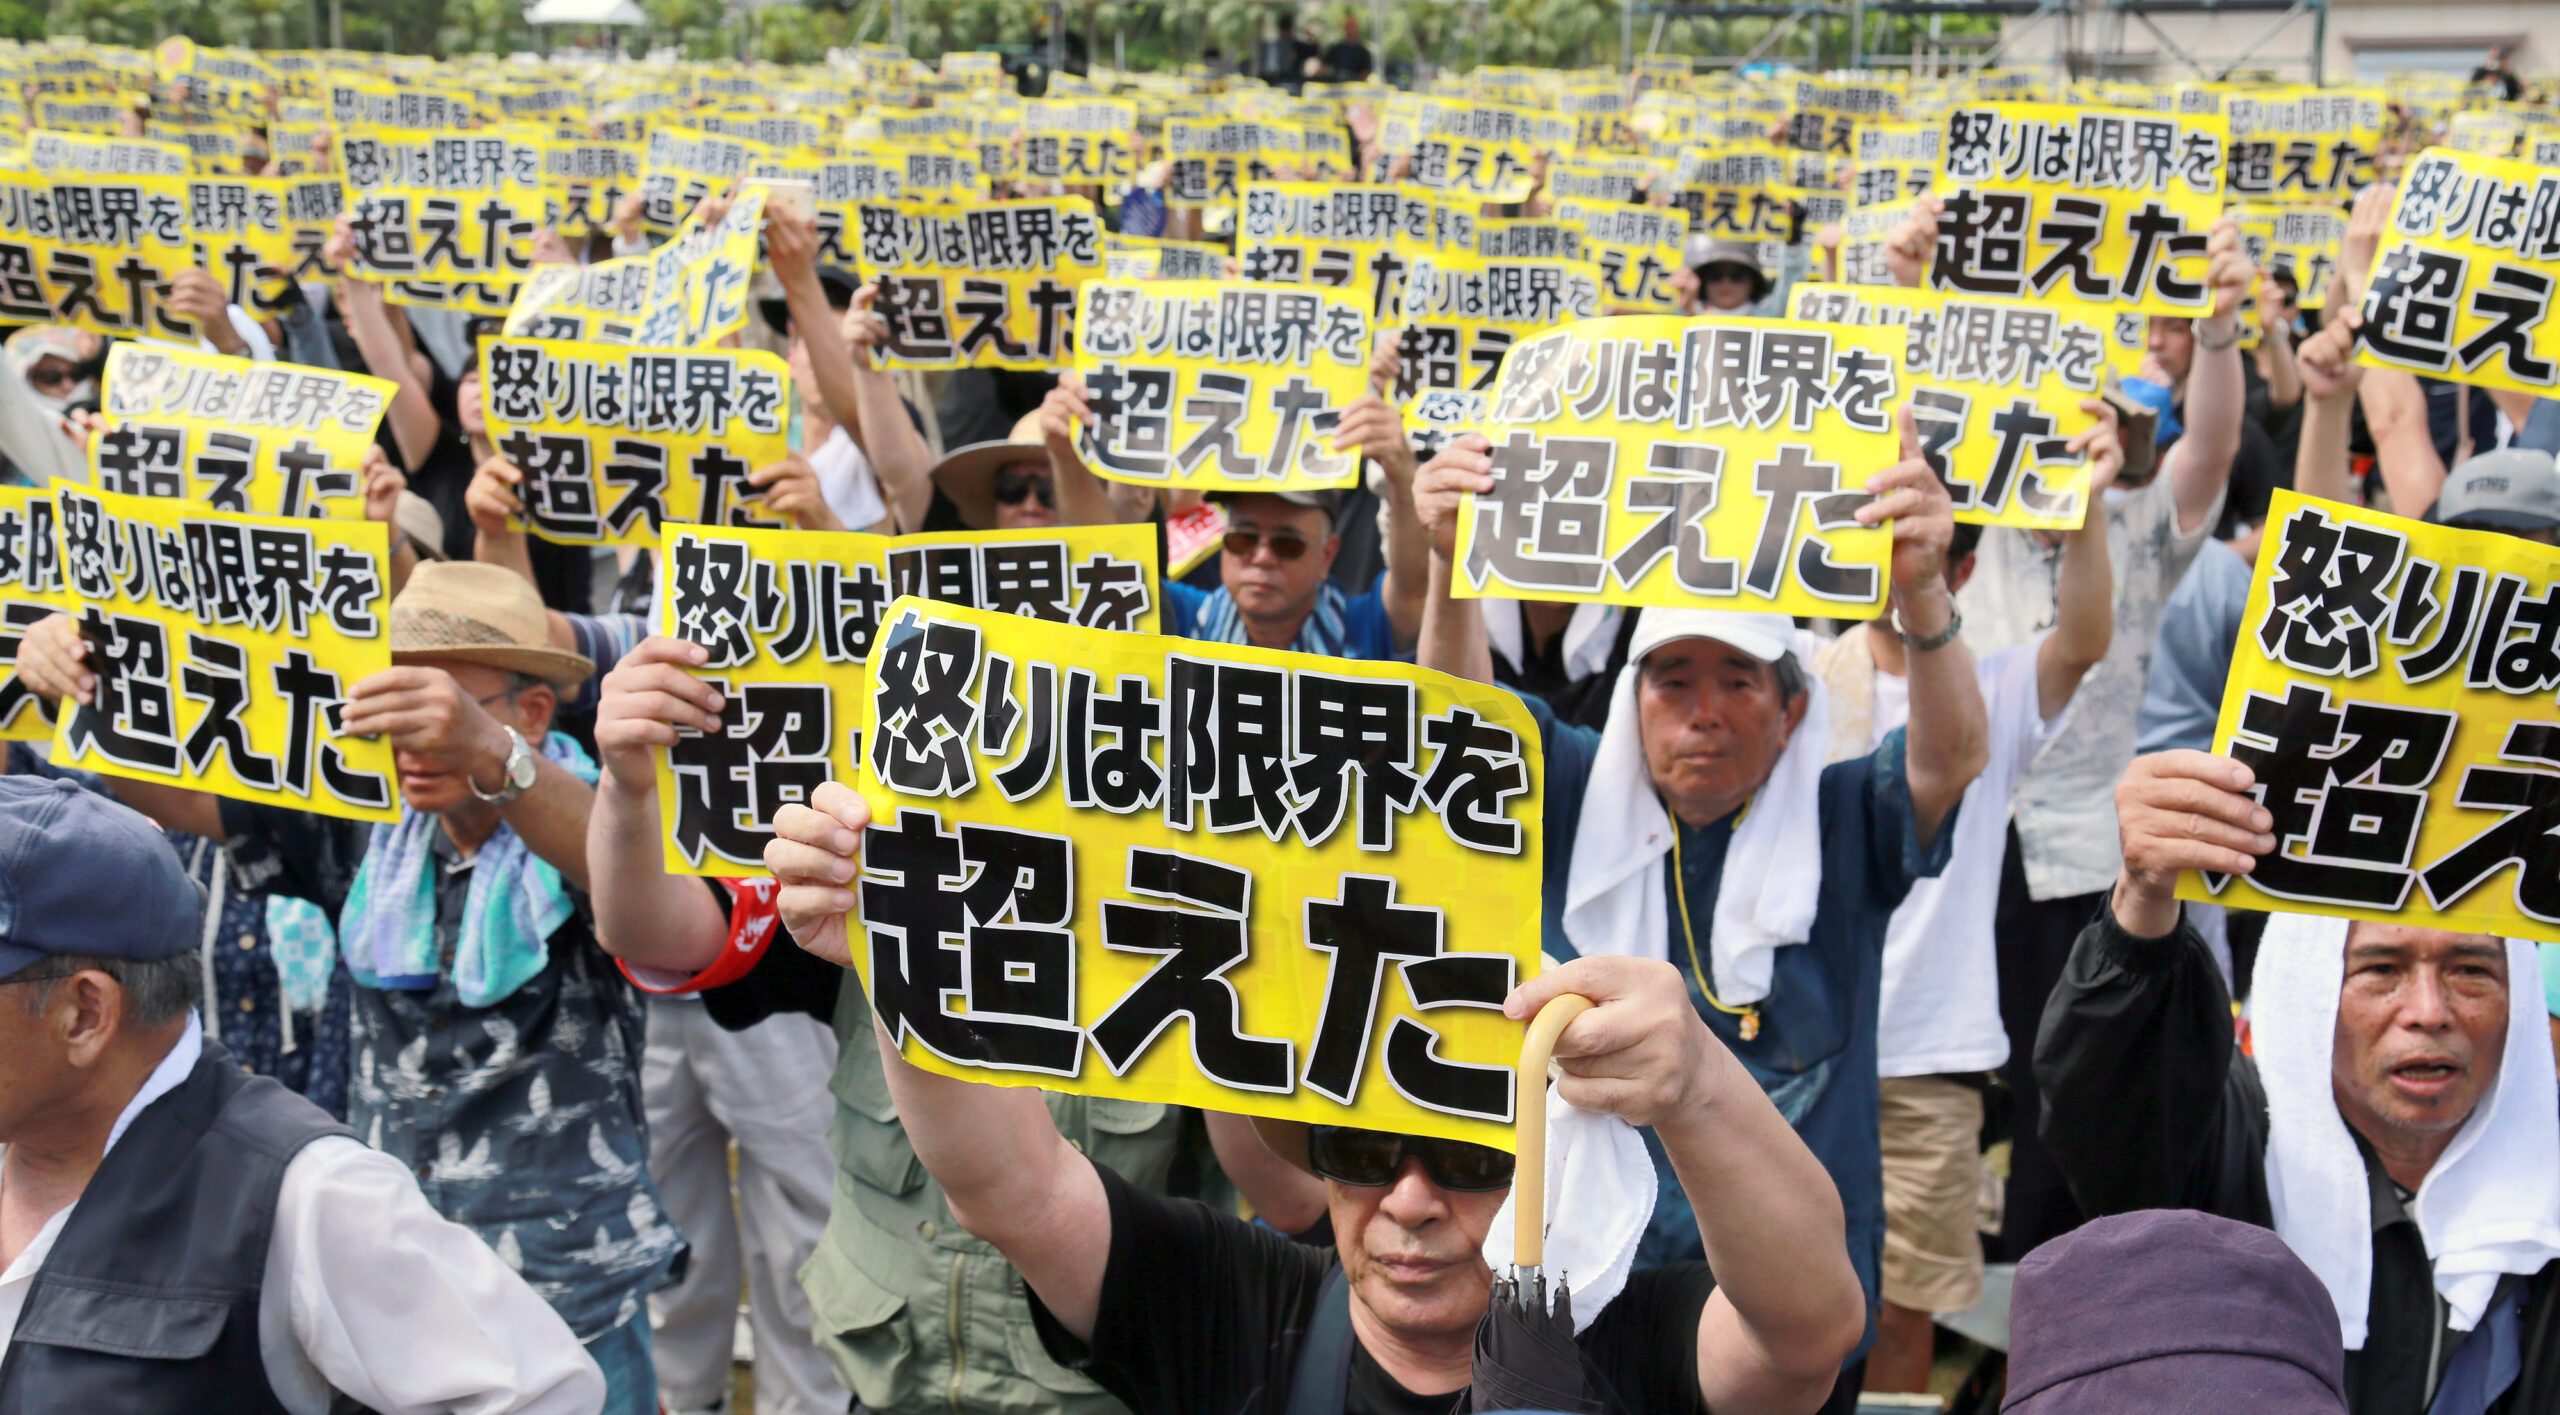 Protesters rally against US military on Okinawa